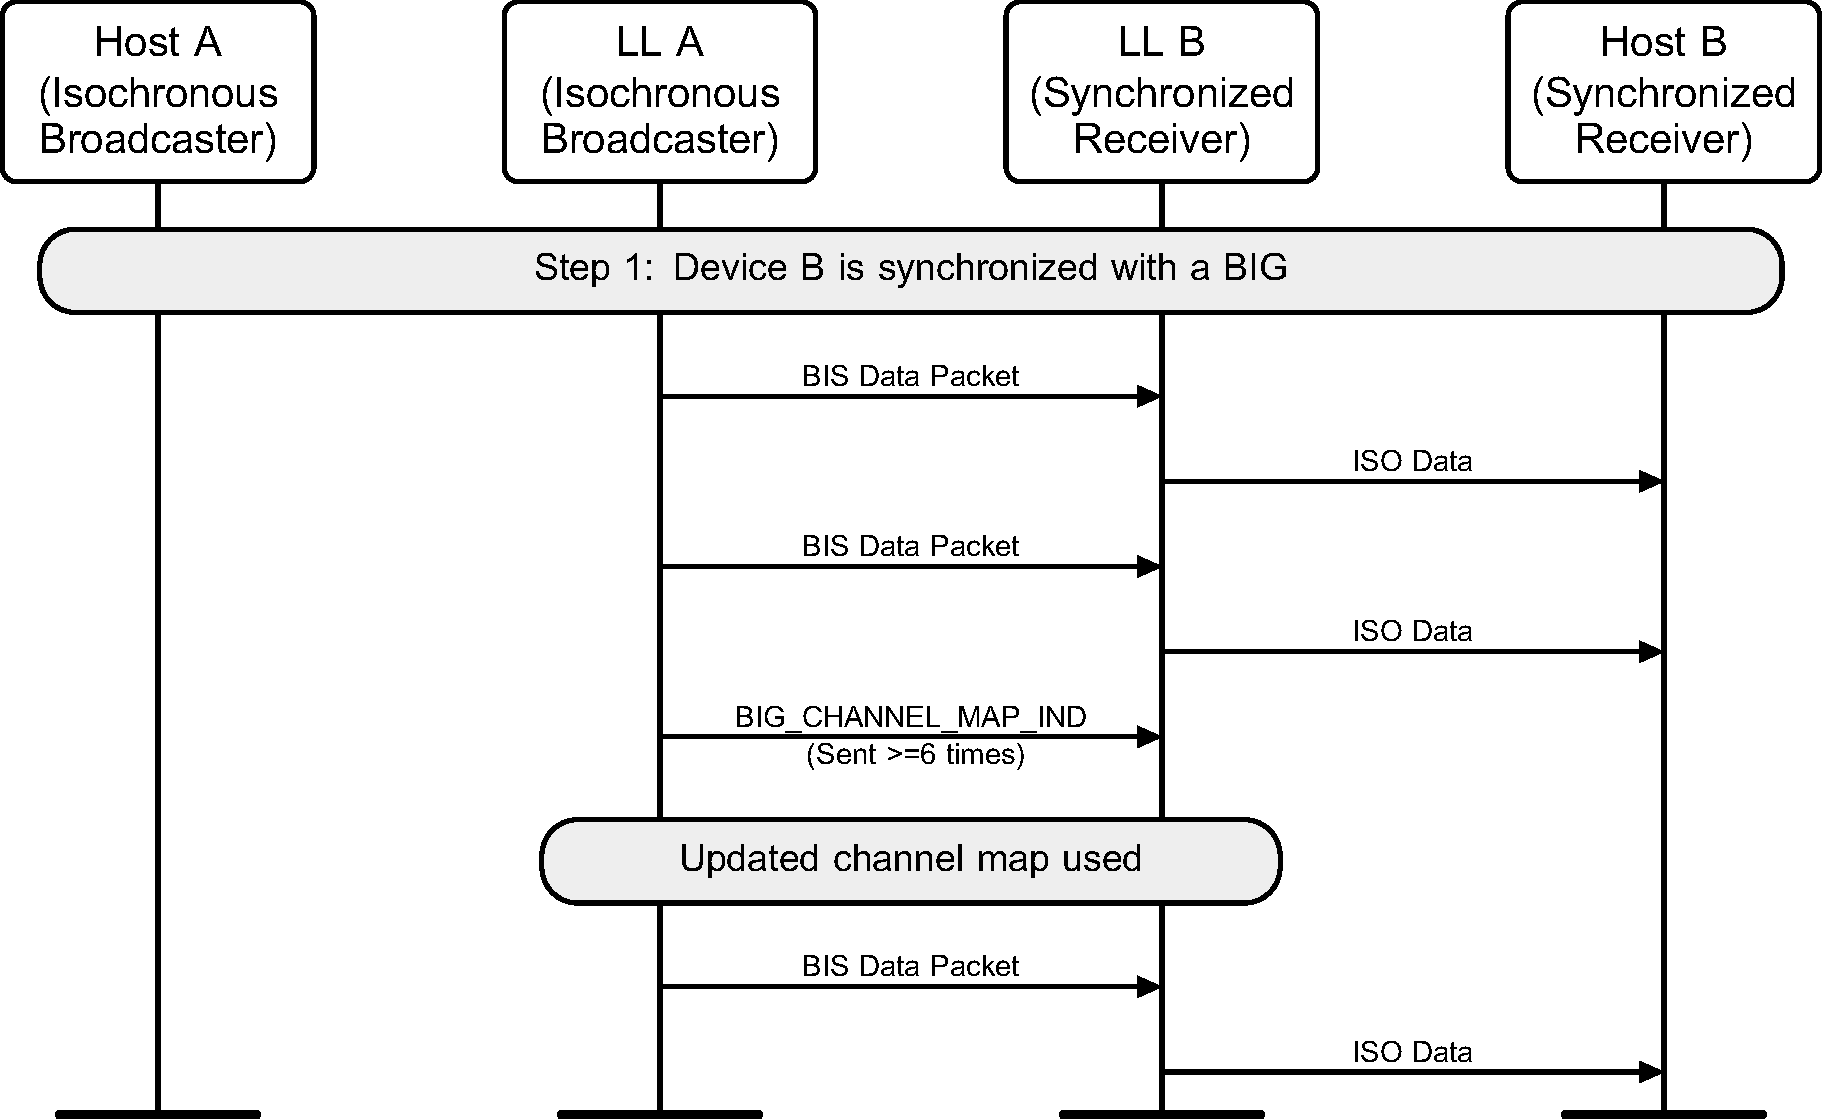 Device A sends a channel map update for a BIG